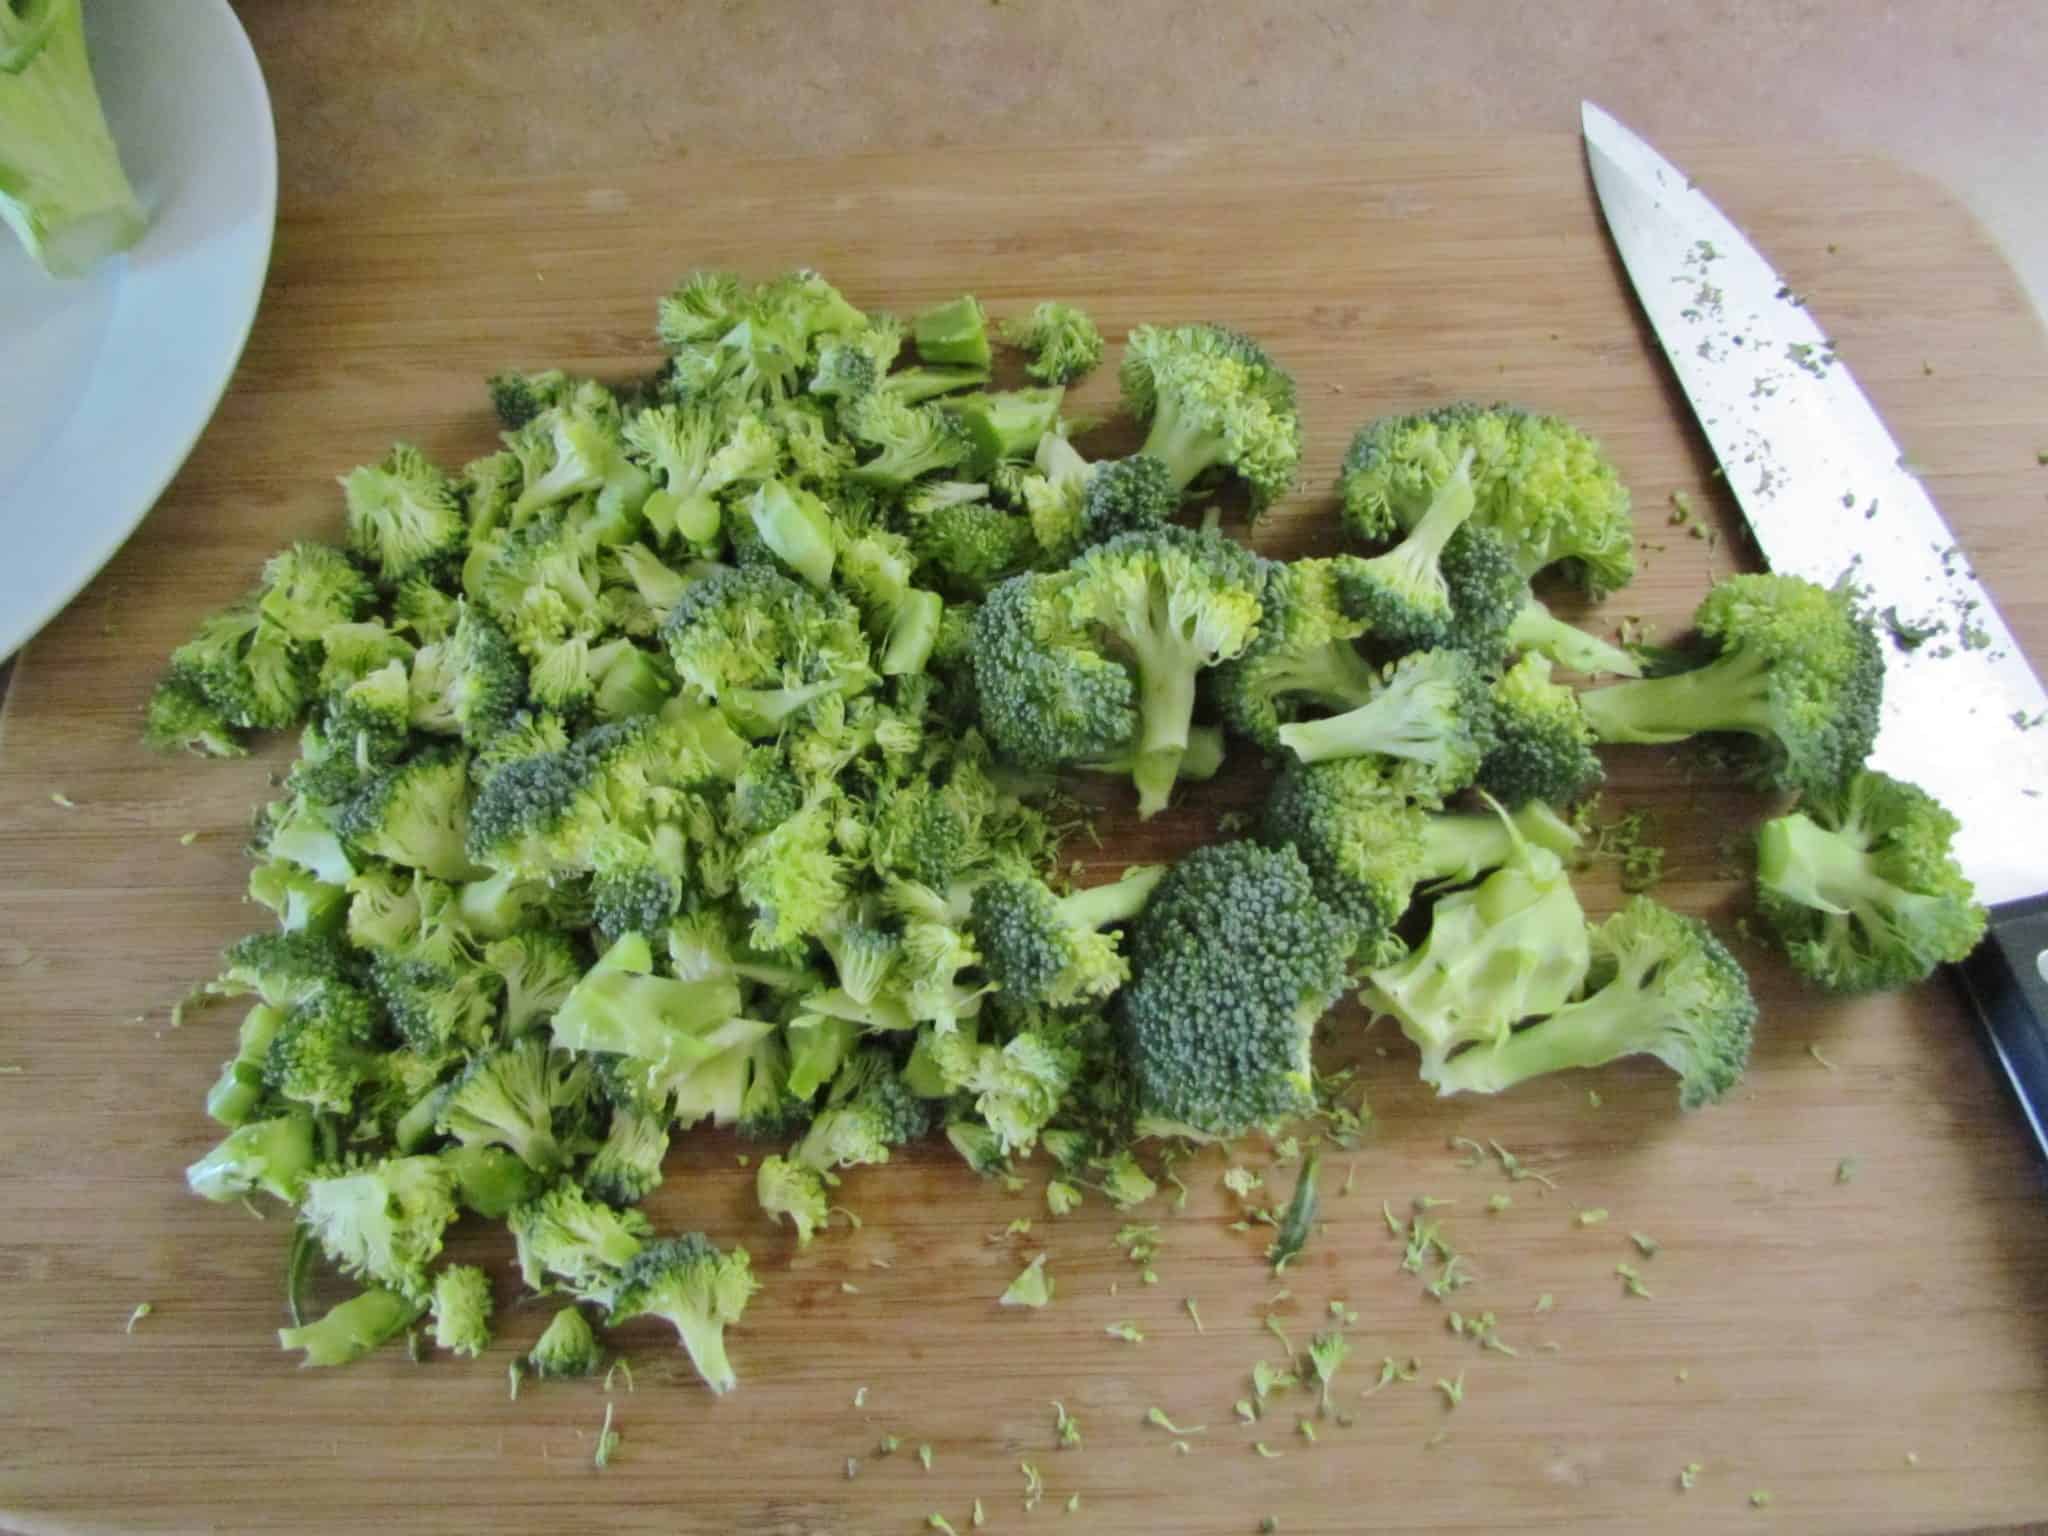 chopped broccoli florets on a wooden cutting board with a chef's knife.